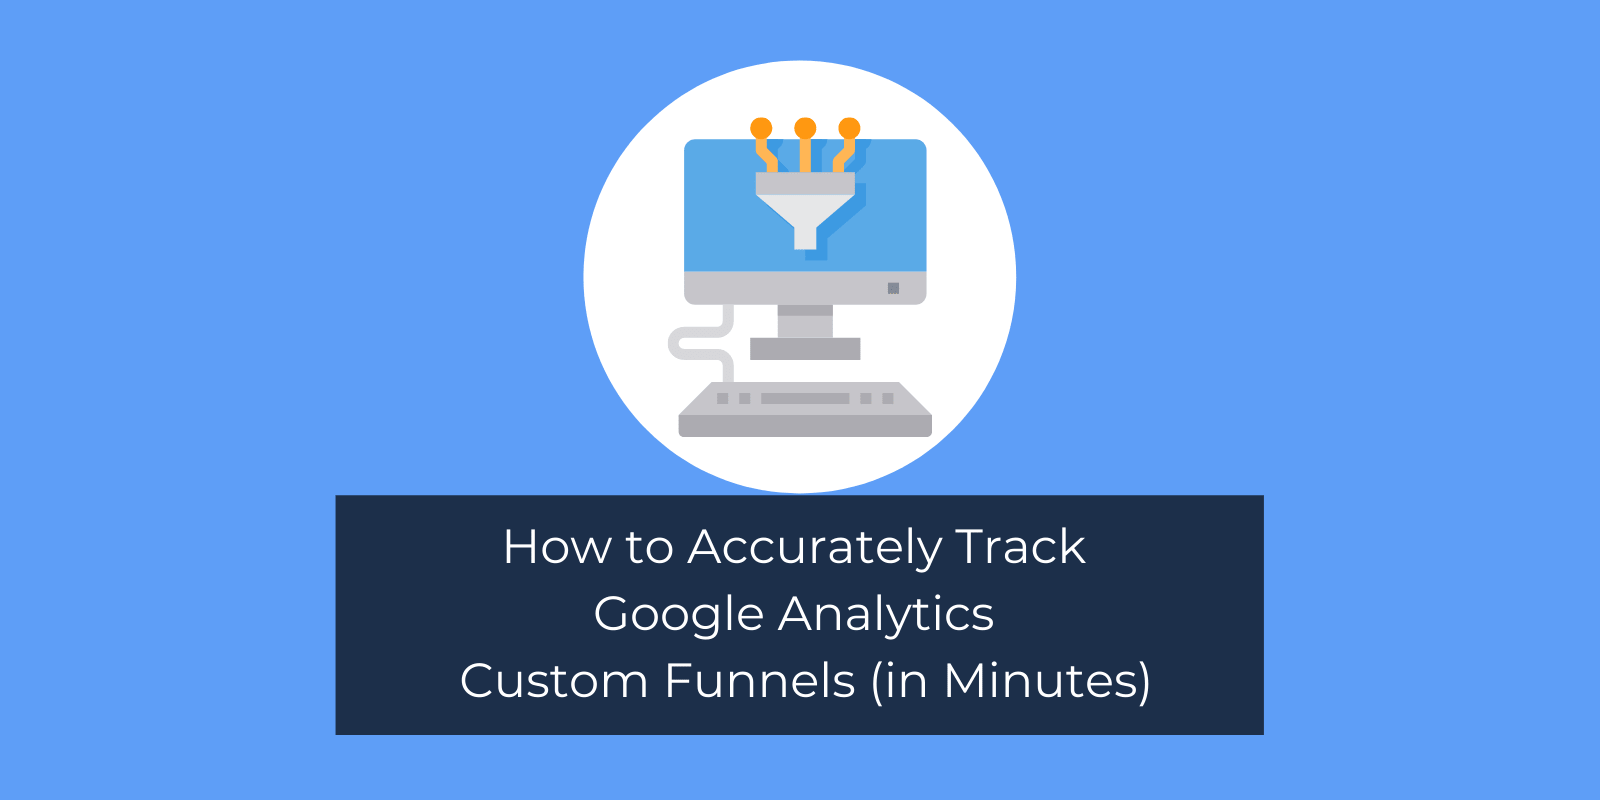 How to Accurately Track Google Analytics Custom Funnels (in Minutes)